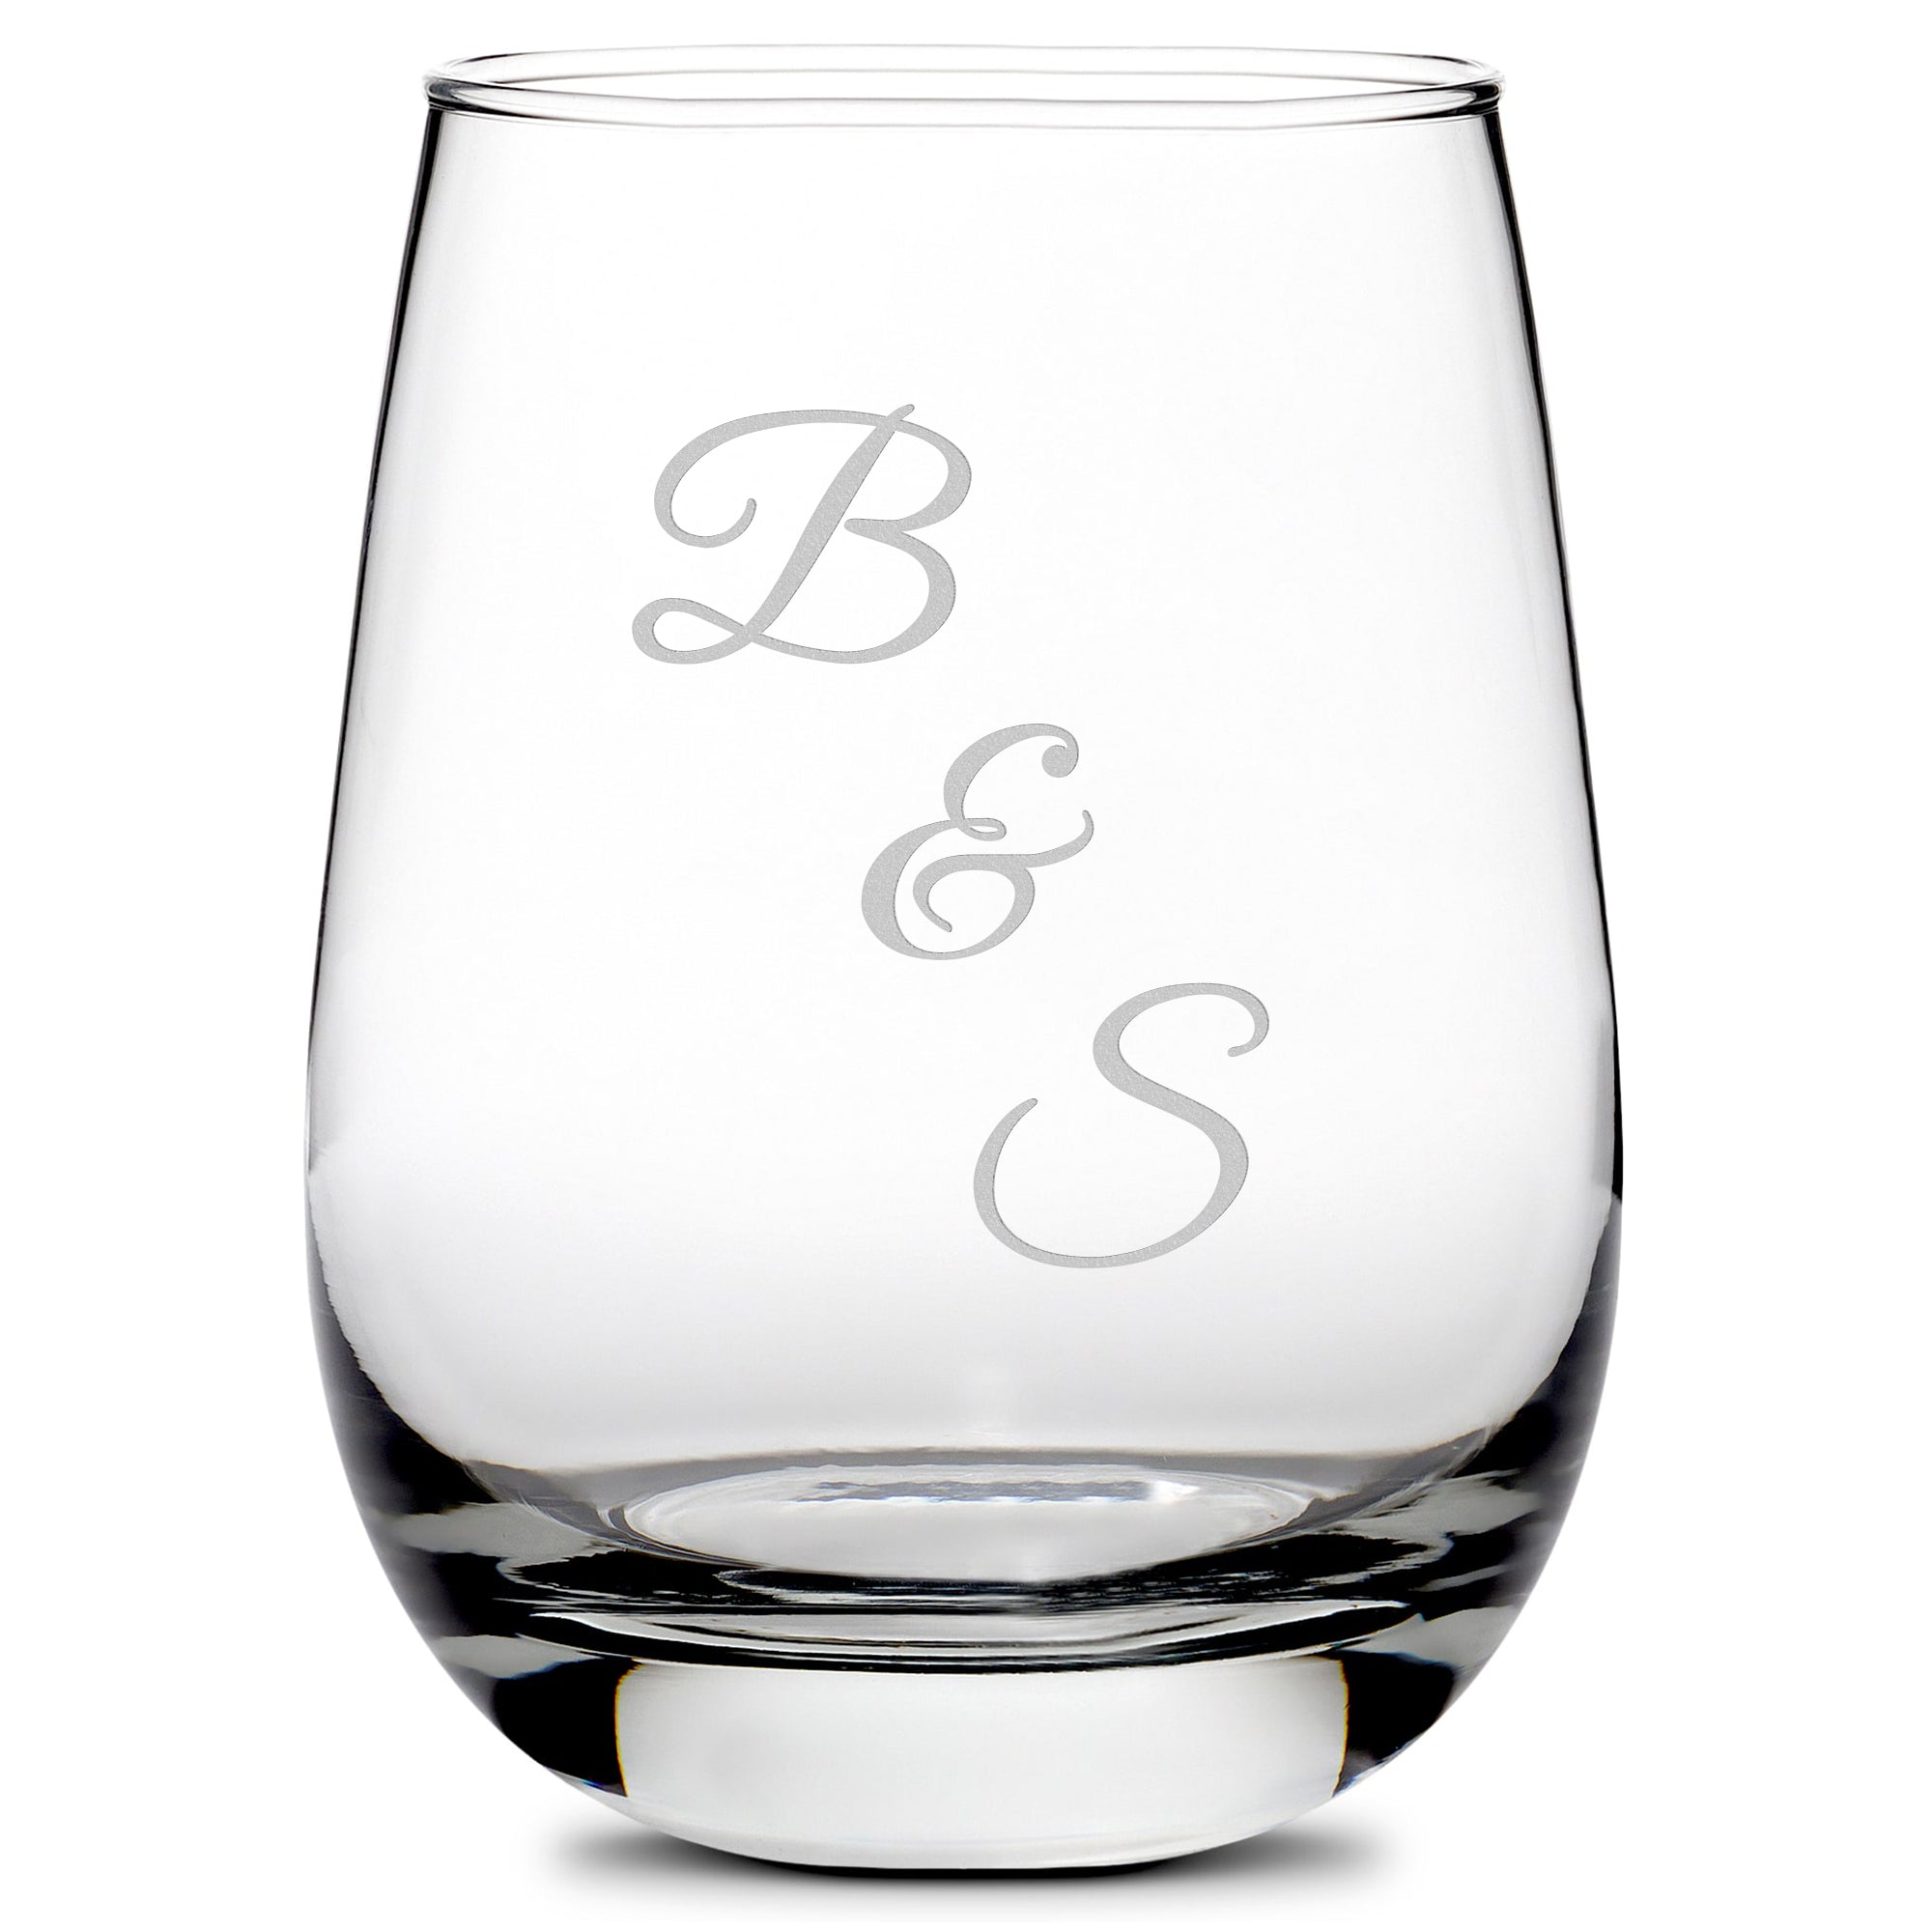 Block Island Etched Stemless Wine Glass - 21…